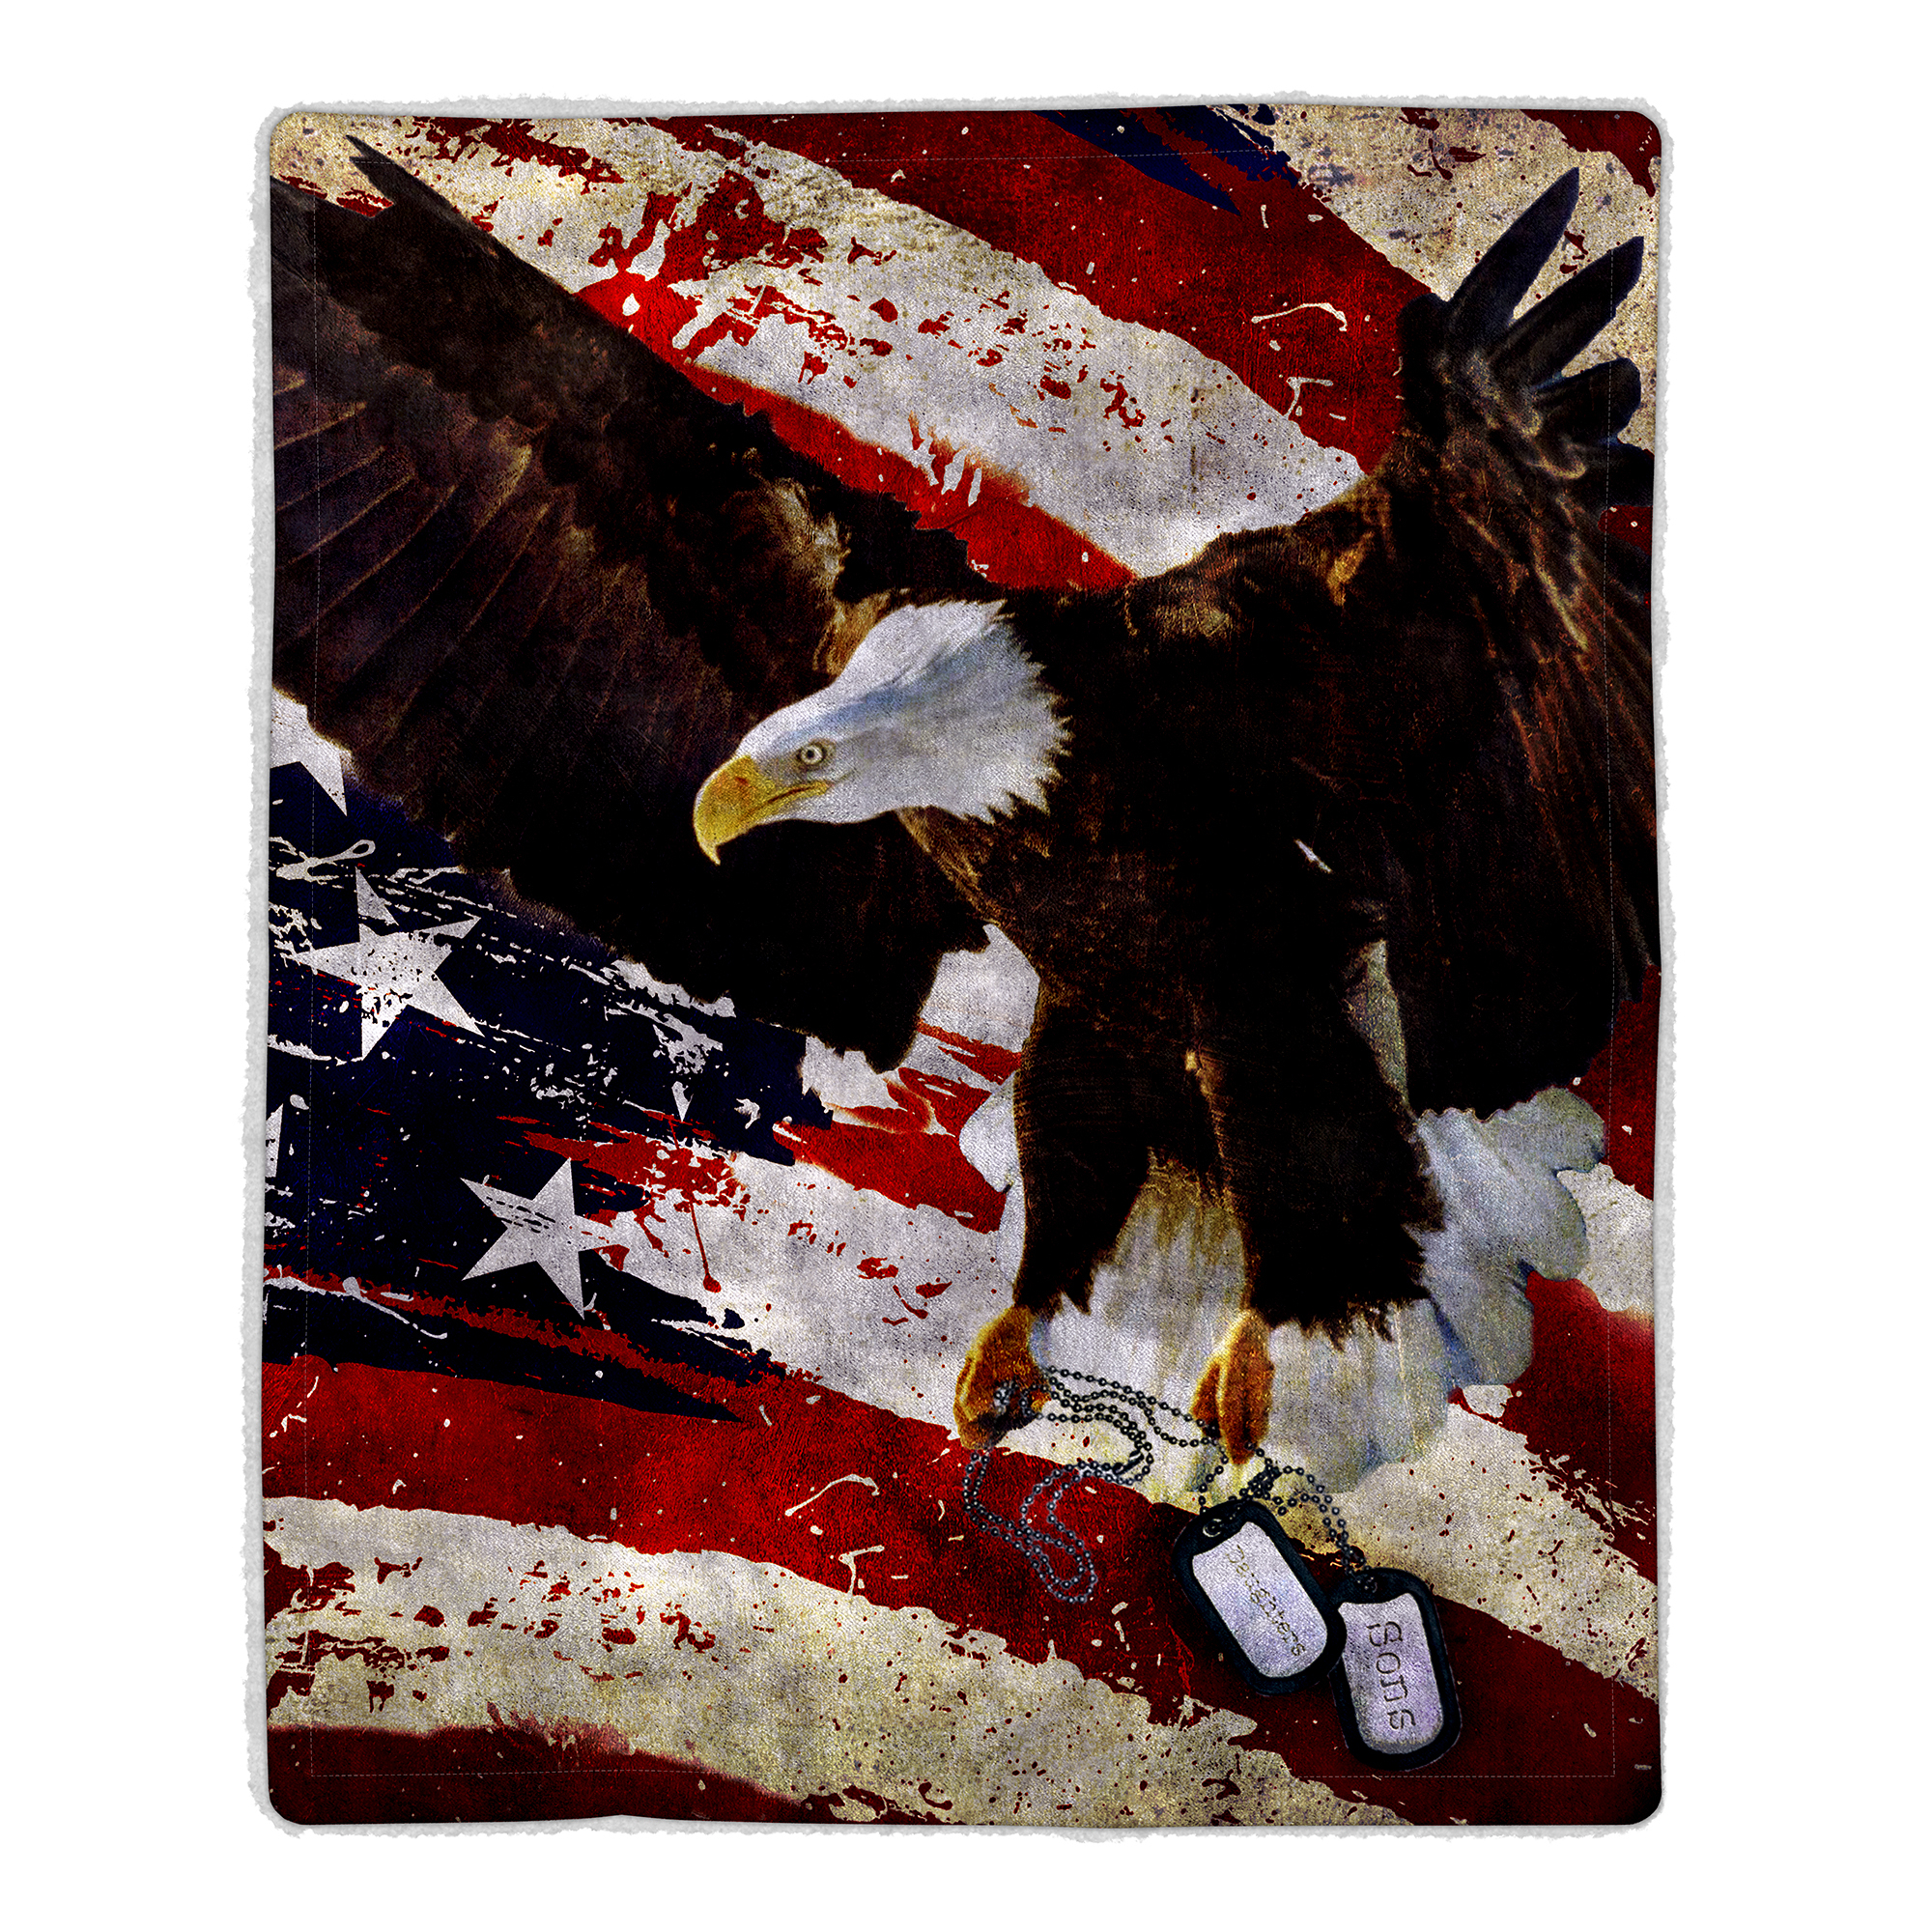 Fluffy Plush Throw Blanket 50 X 60 Inch - American Flag Bald Eagle Print, Lightweight Hypoallergenic Bed Couch Plush